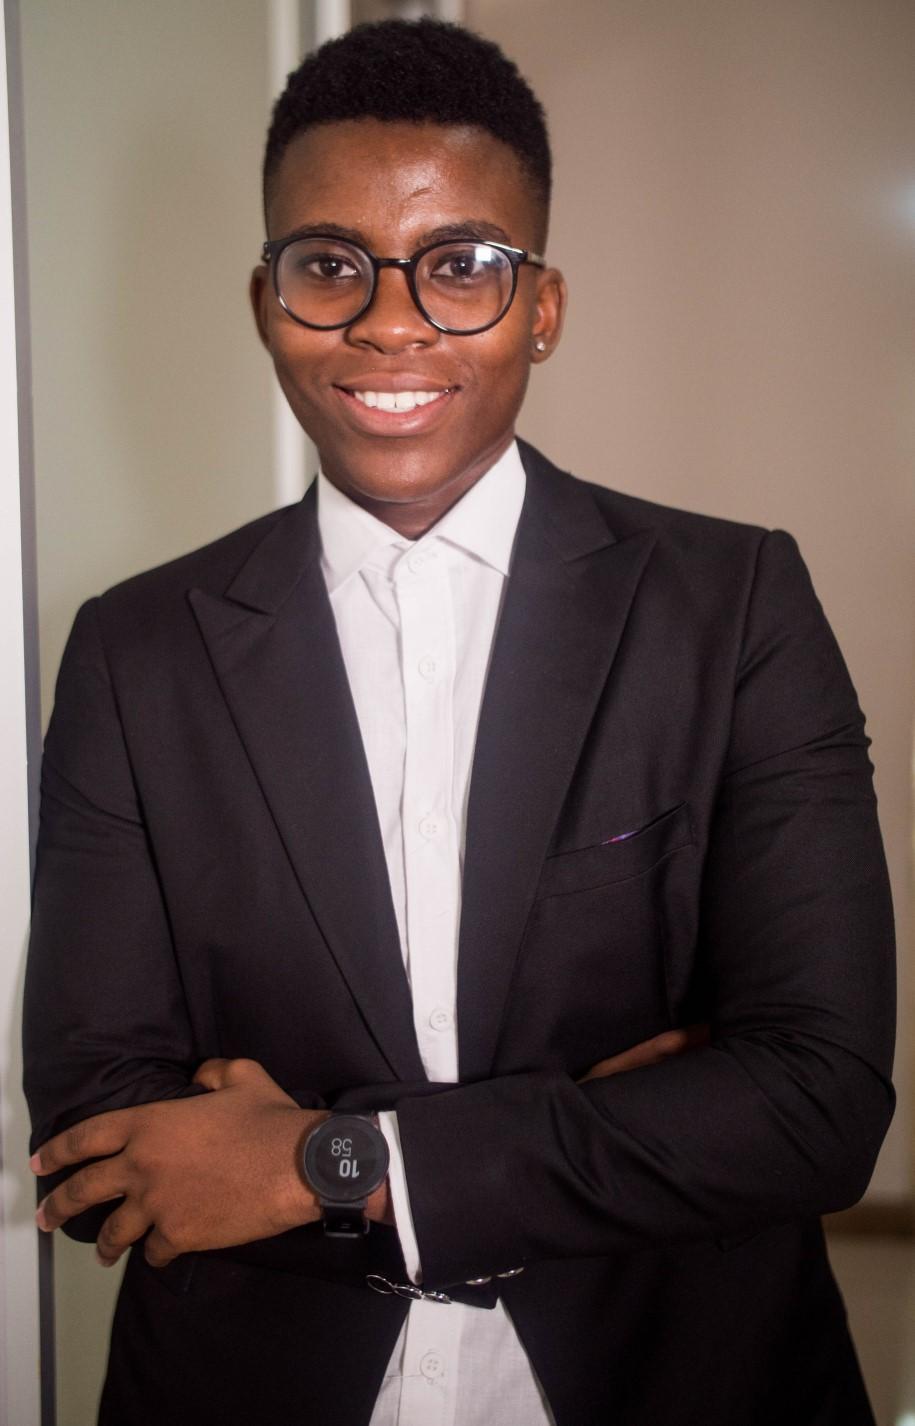 S SENWELO MODISE PUPIL LLB (University of Botswana) 2018 PROFESSIONAL QUALIFICATION Attorney of the High Courts of Botswana (2018) Certified Information Privacy Professional (CIPP/E)(2018)